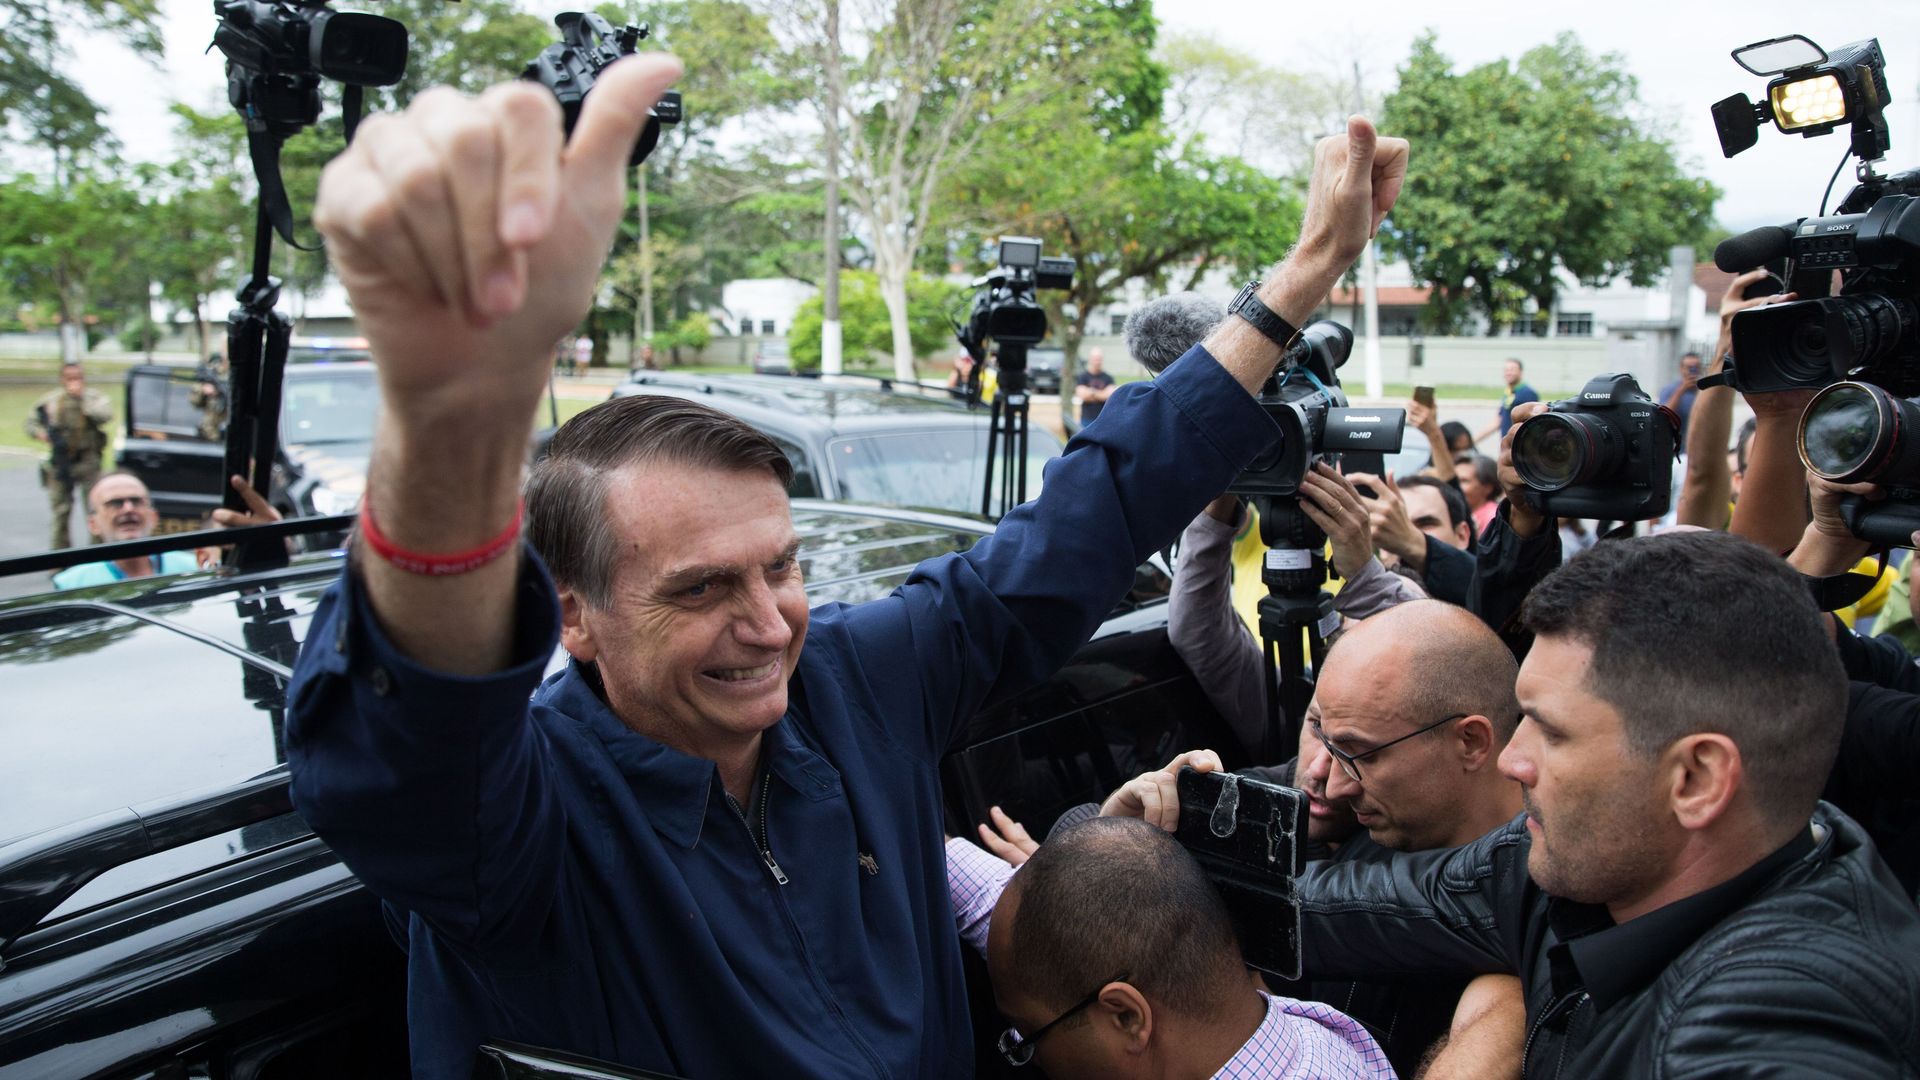 Jair Bolsonaro gets out of car, puts arms and thumbs up while surrounded by people